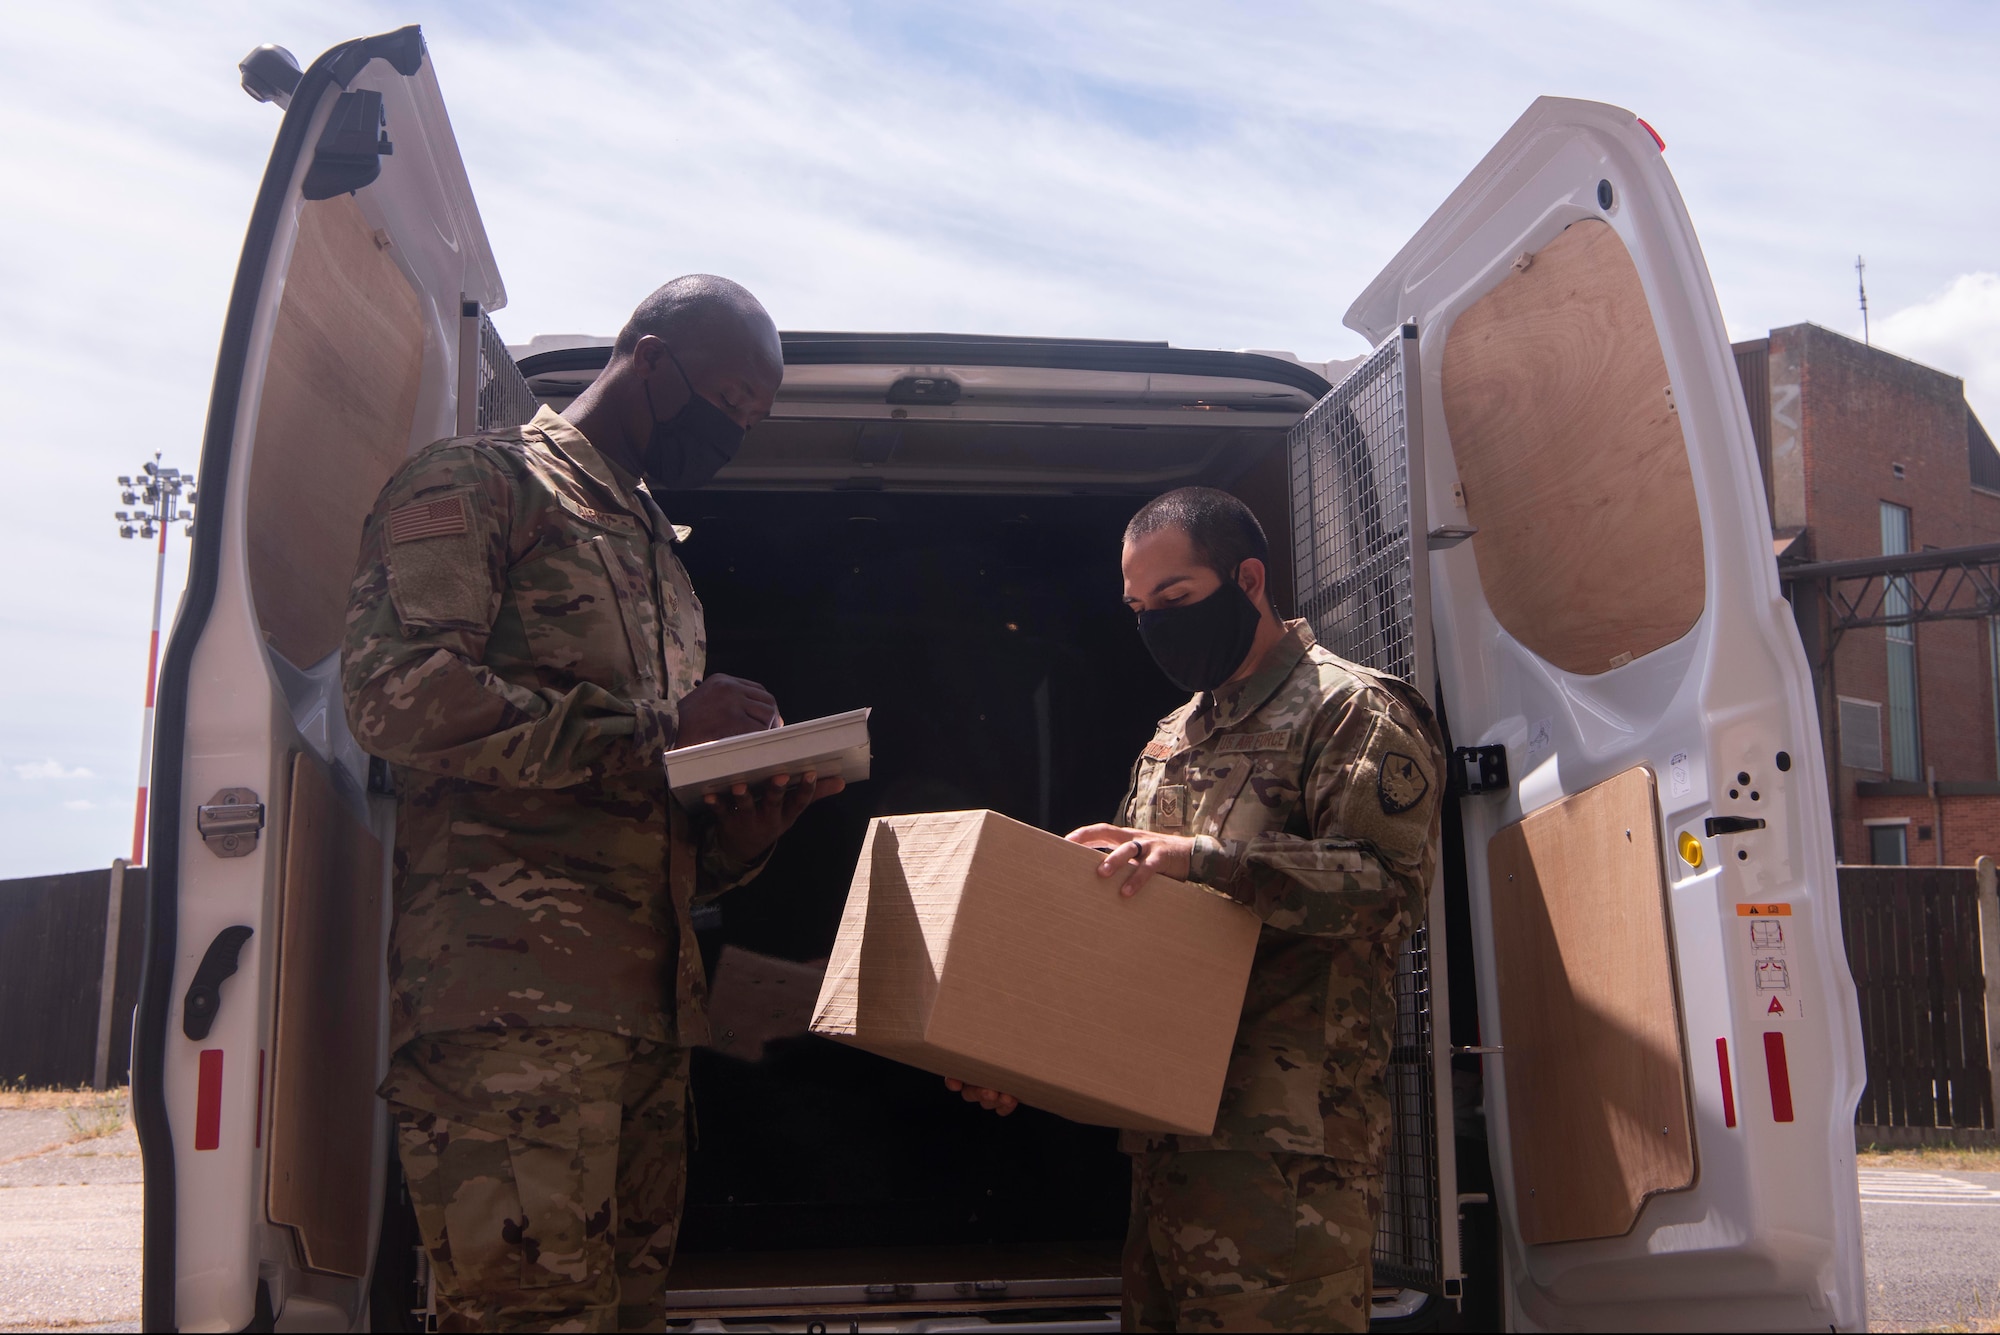 Staff Sgt. Isaac Darko and Staff Sgt. Isaac Portocarrero, Defense Courier Station Mildenhall defense couriers, load packages into a mission vehicle at RAF Mildenhall, England, June 2, 2020. Factors such as the size of the asset and delivery destination dictate the mode of transportation defense couriers use to move items. (U.S. Air Force photo by Airman 1st Class Joseph Barron)